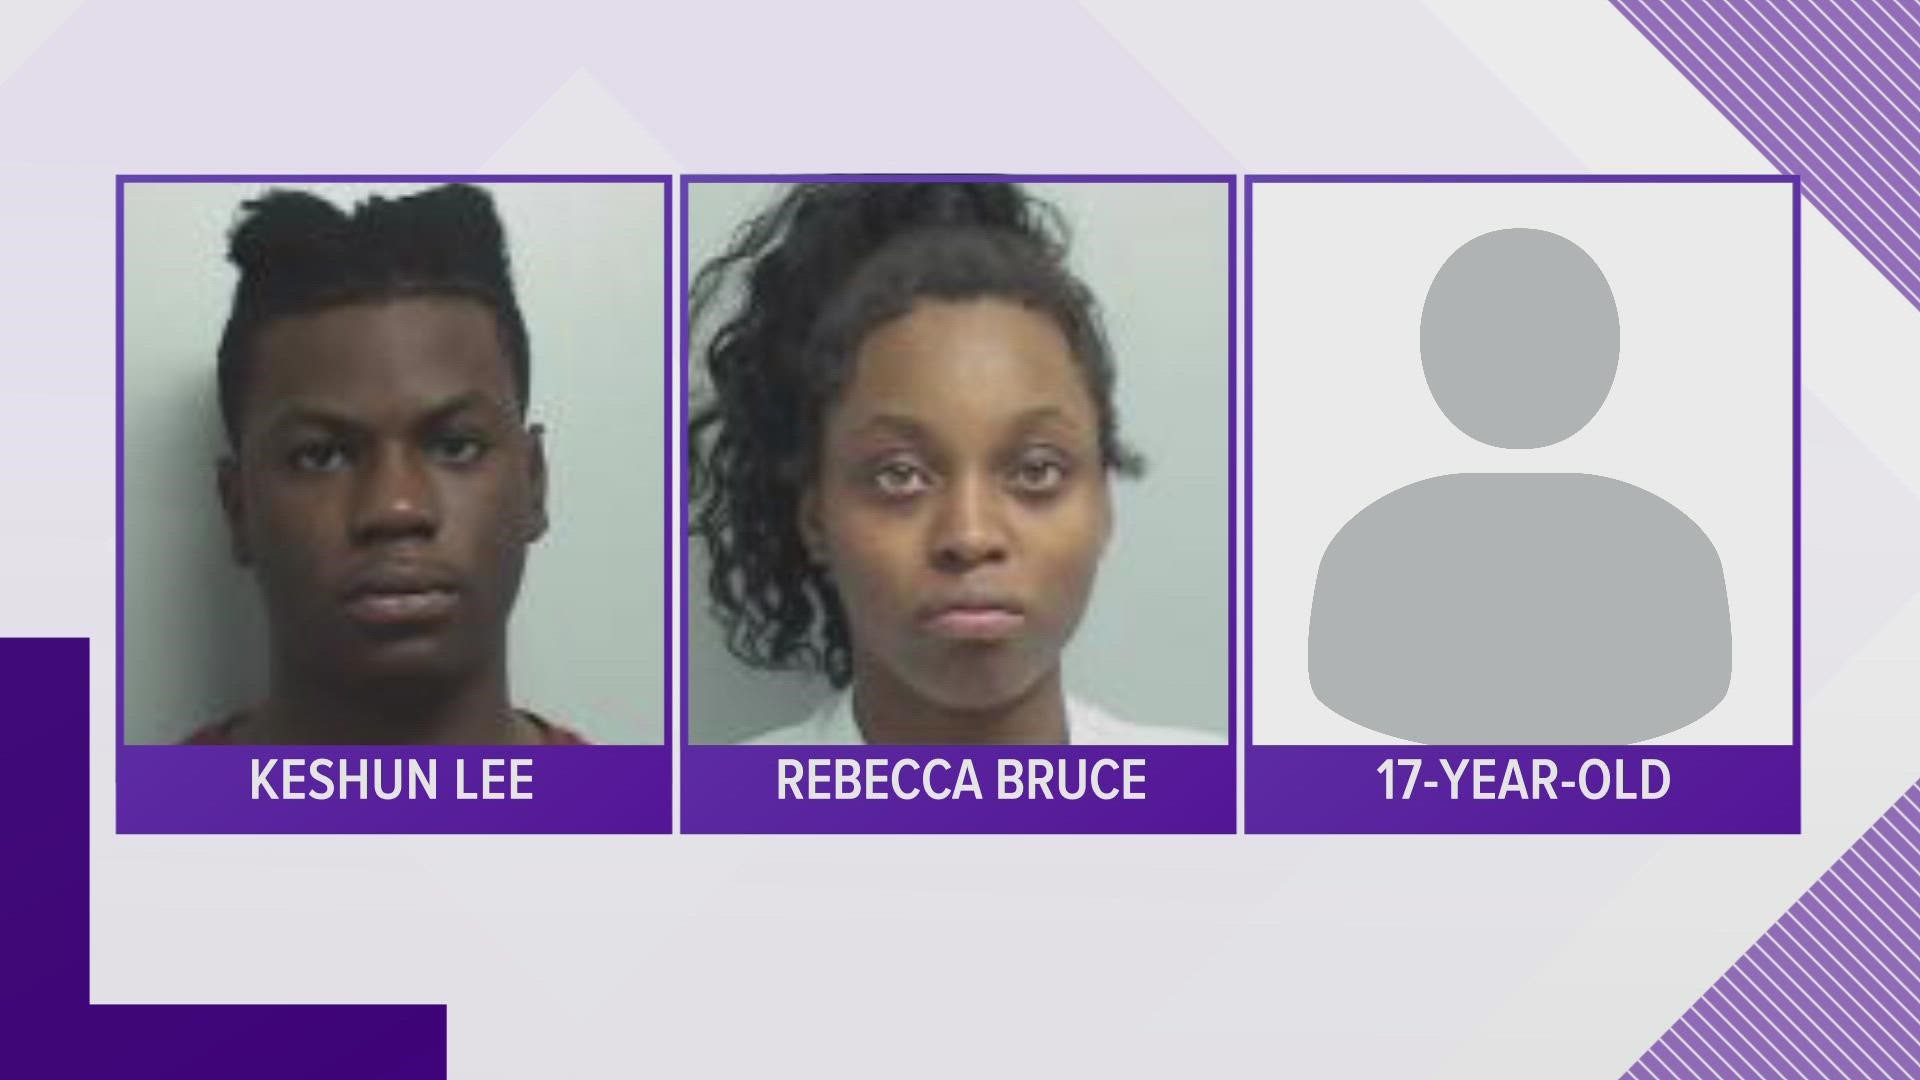 Collierville Police said the 17, 18 and 19-year-old teens were charged with property theft.